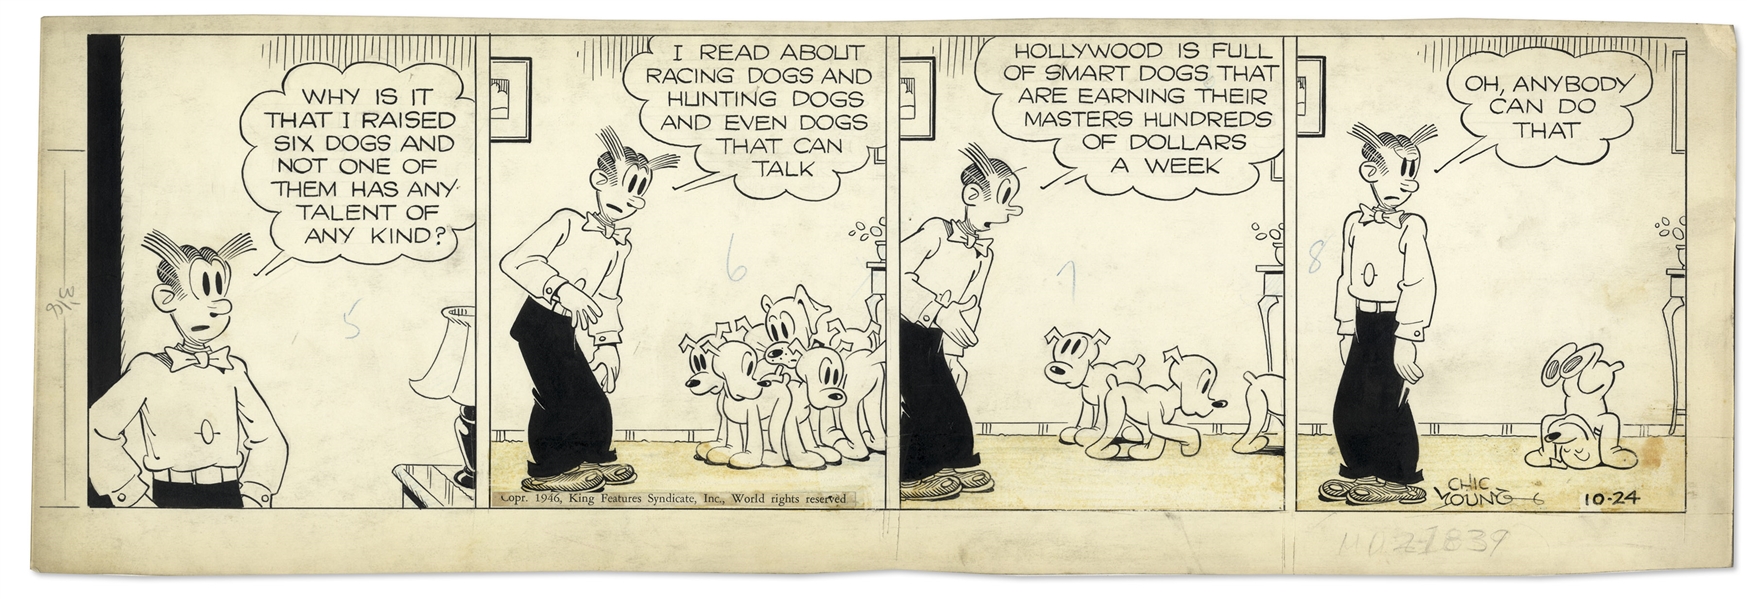 Chic Young Hand-Drawn ''Blondie'' Comic Strip From 1946 Titled ''But It Takes Practice!'' -- Featuring Daisy & Her Puppies